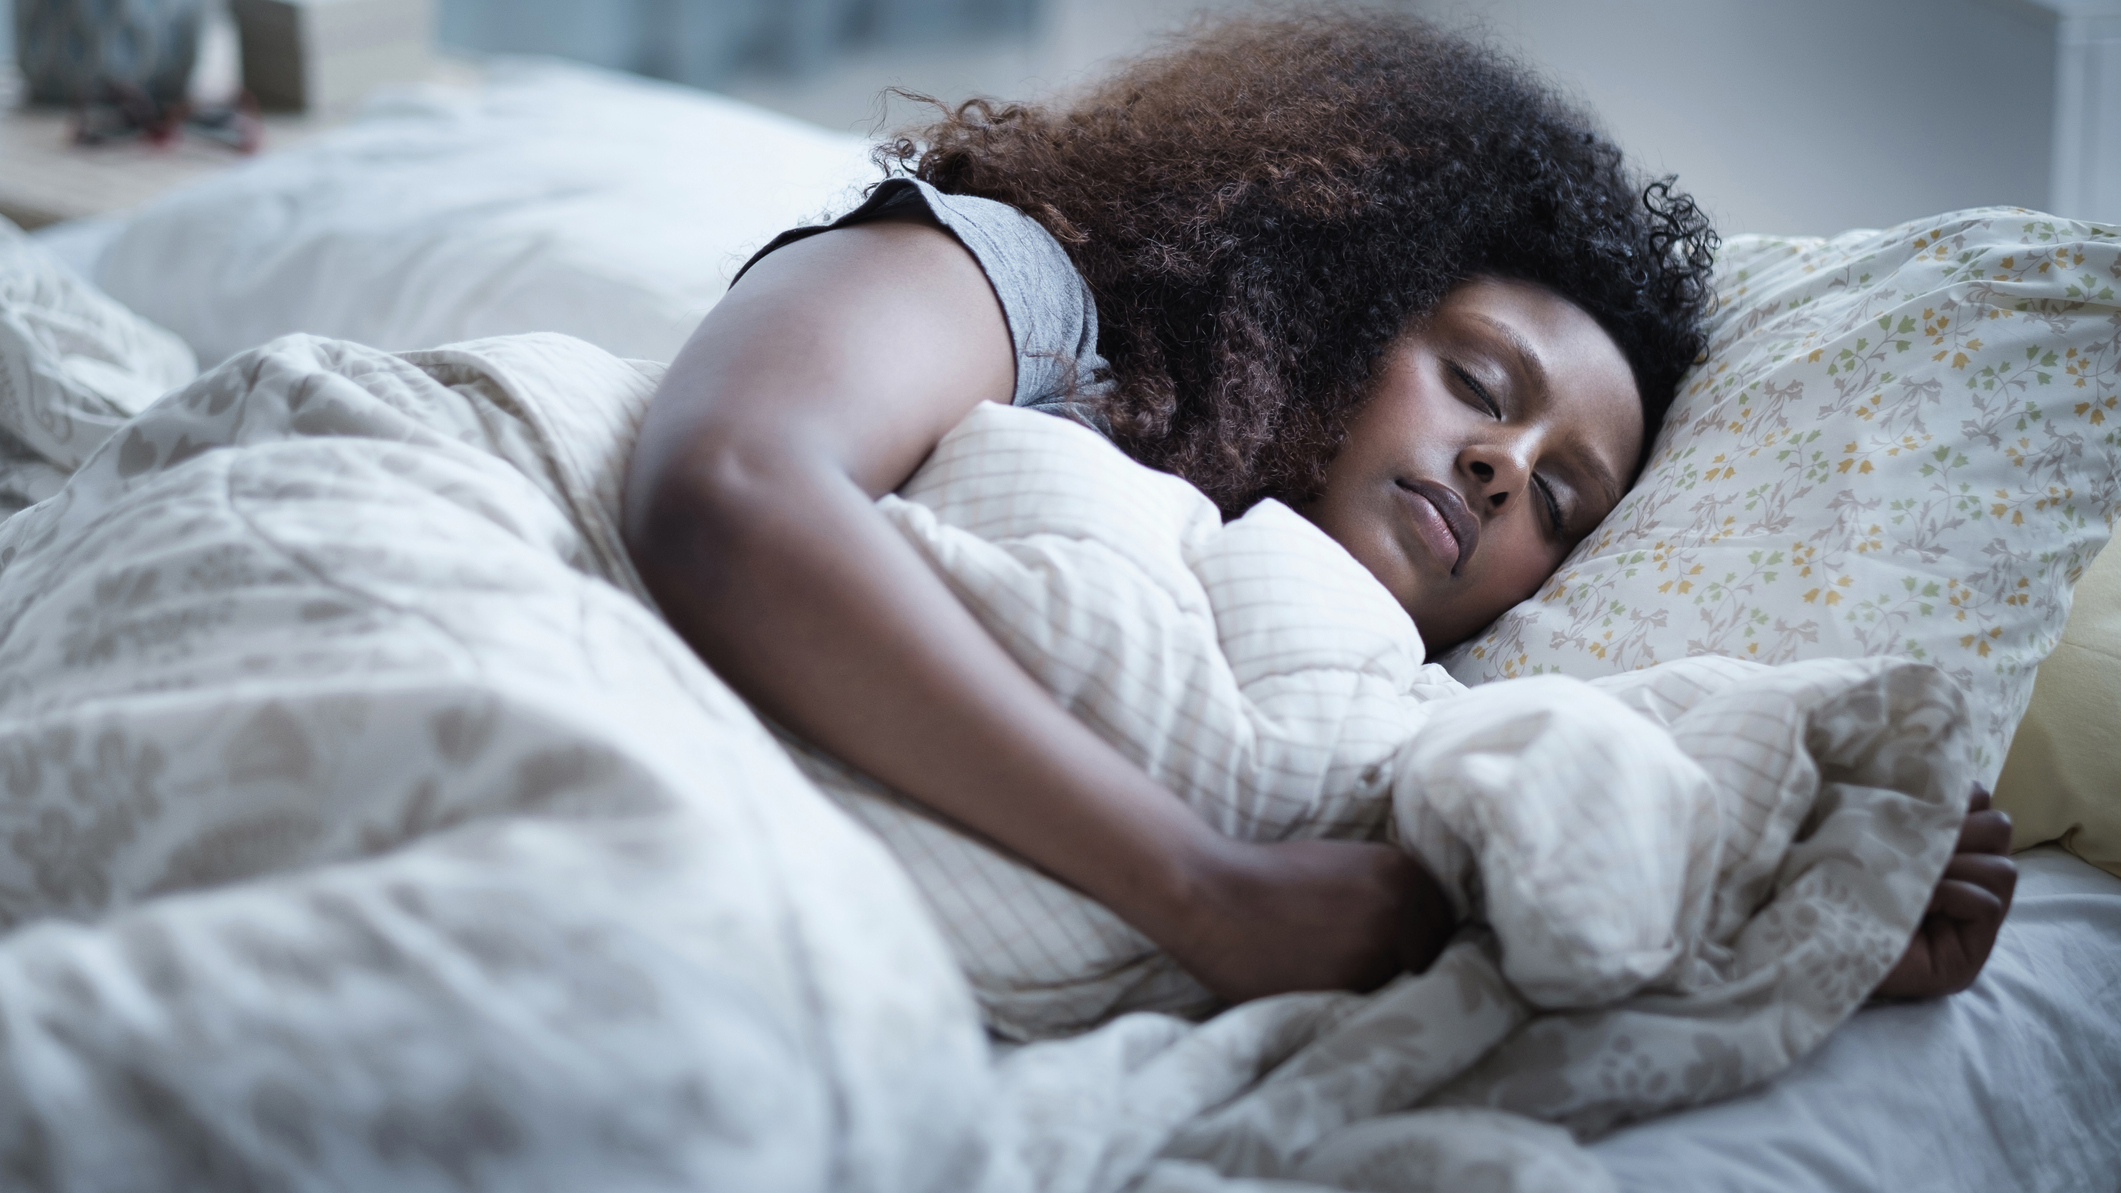 A woman with dark curly hair sleeps on a plush mattress and pillows